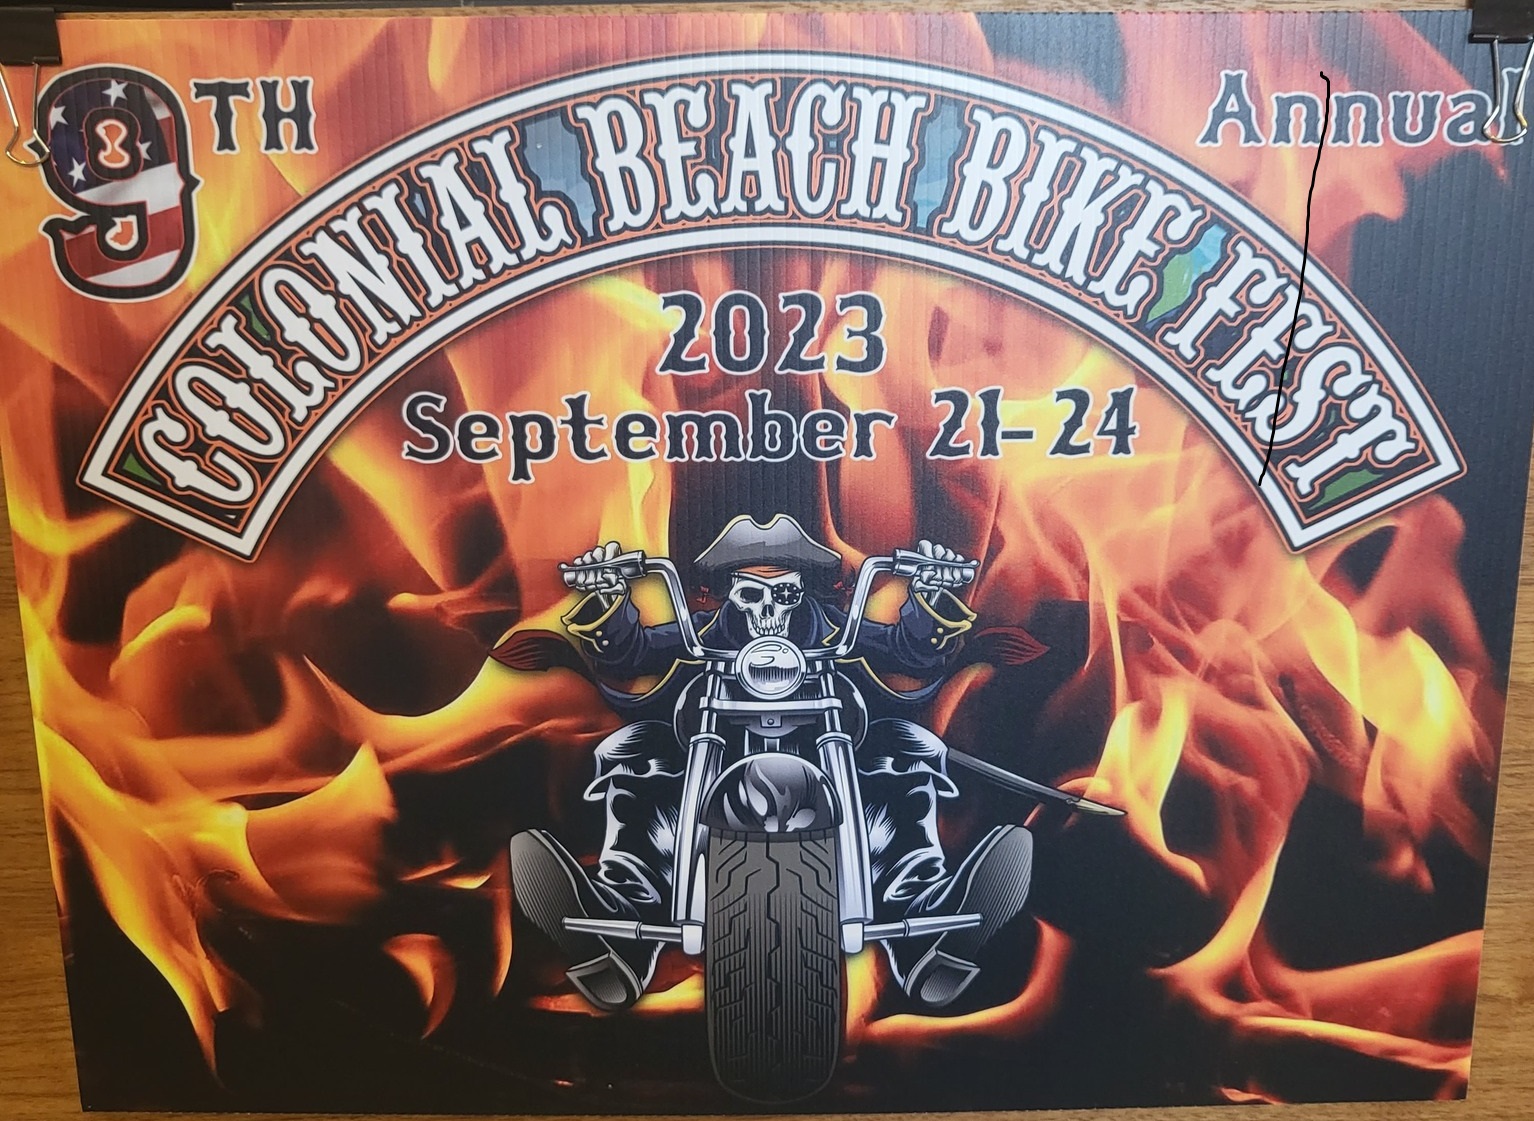 2023 Bikefest Sign by CB Printing